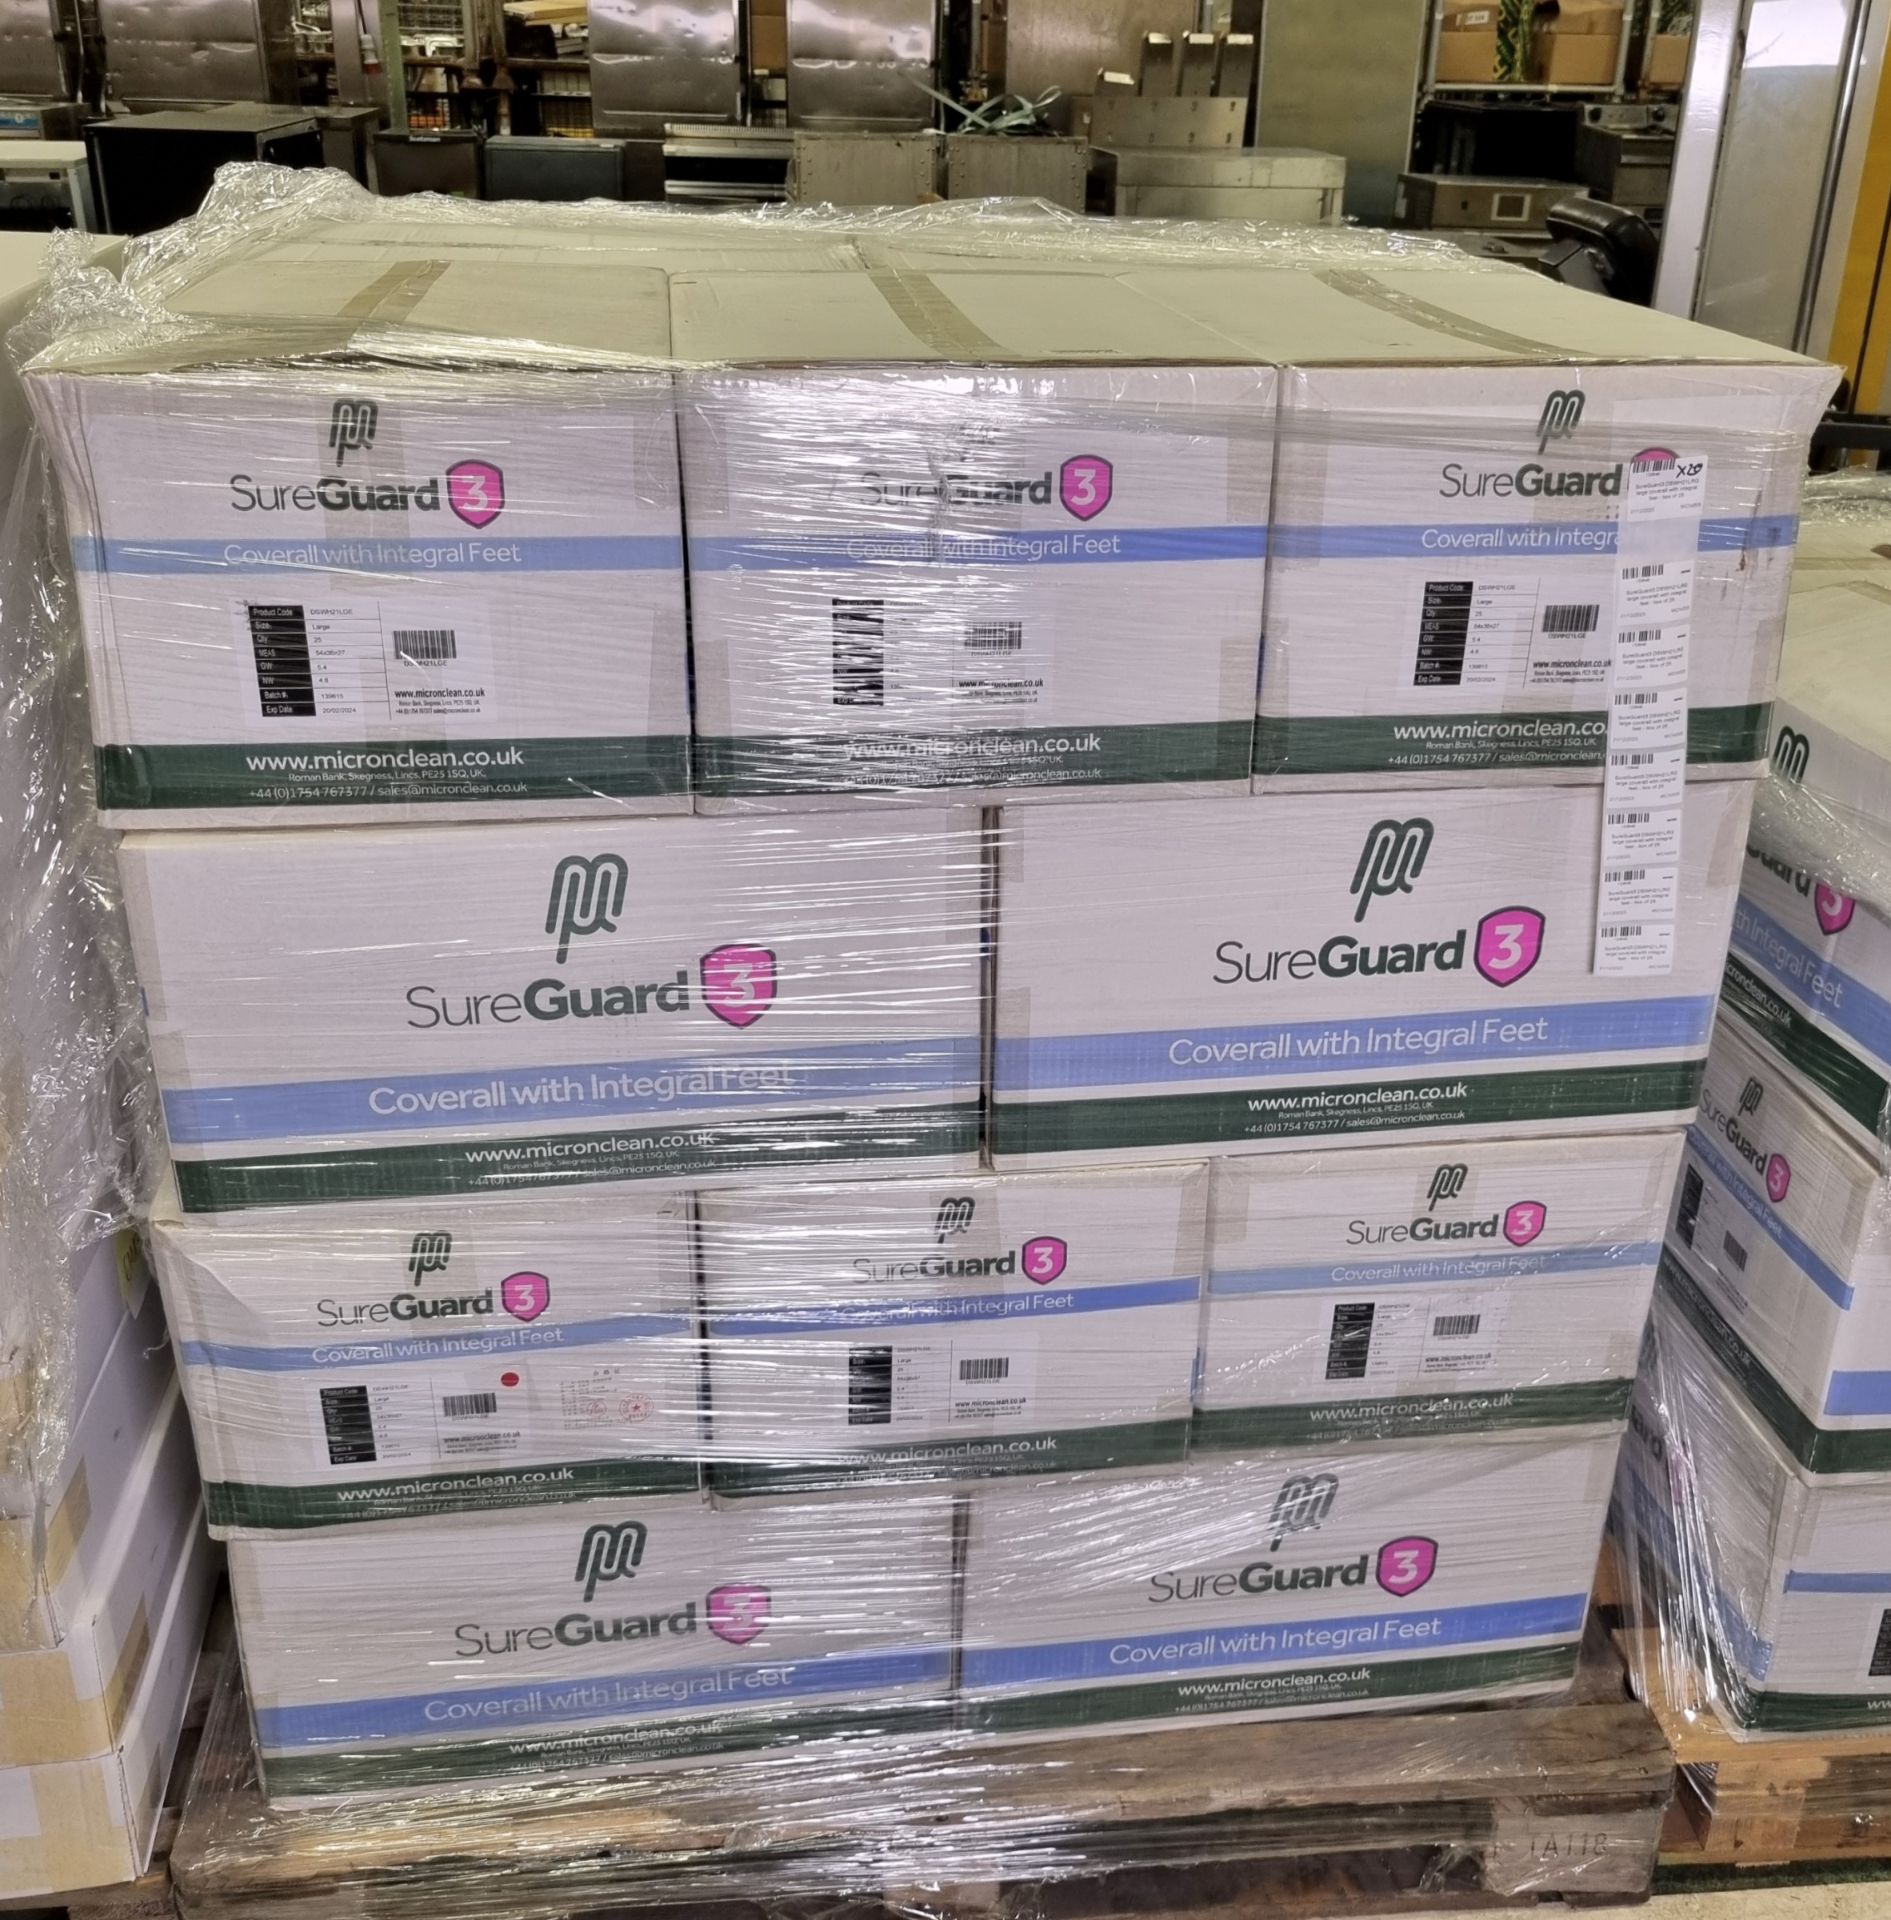 20x boxes of SureGuard3 DSWH21LRG large coverall with integral feet - 25 units per box - Image 5 of 5